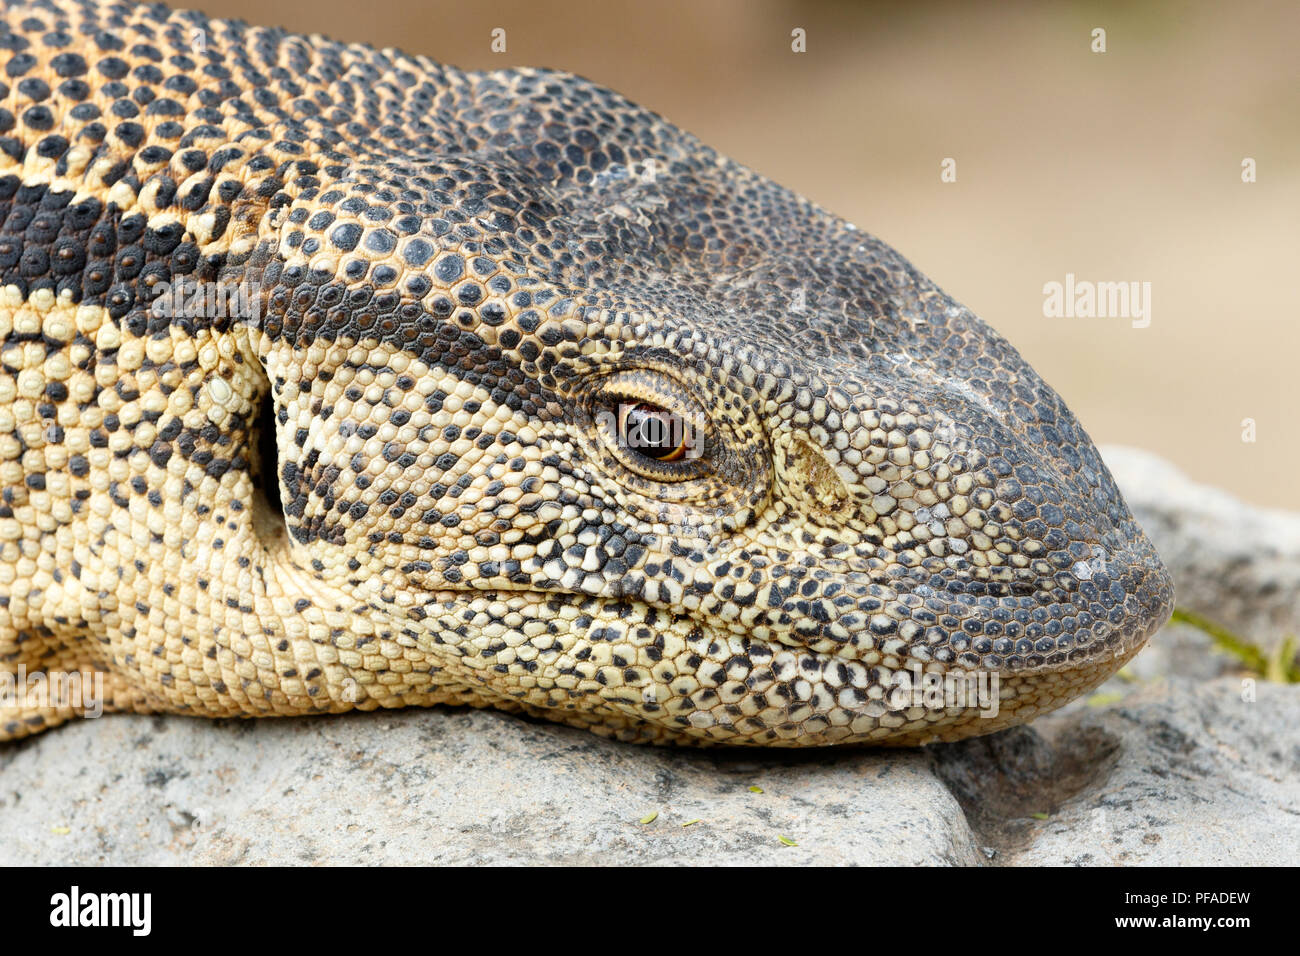 Close Up of a Monitor Lizard sitting on a rock in the sun Stock Photo